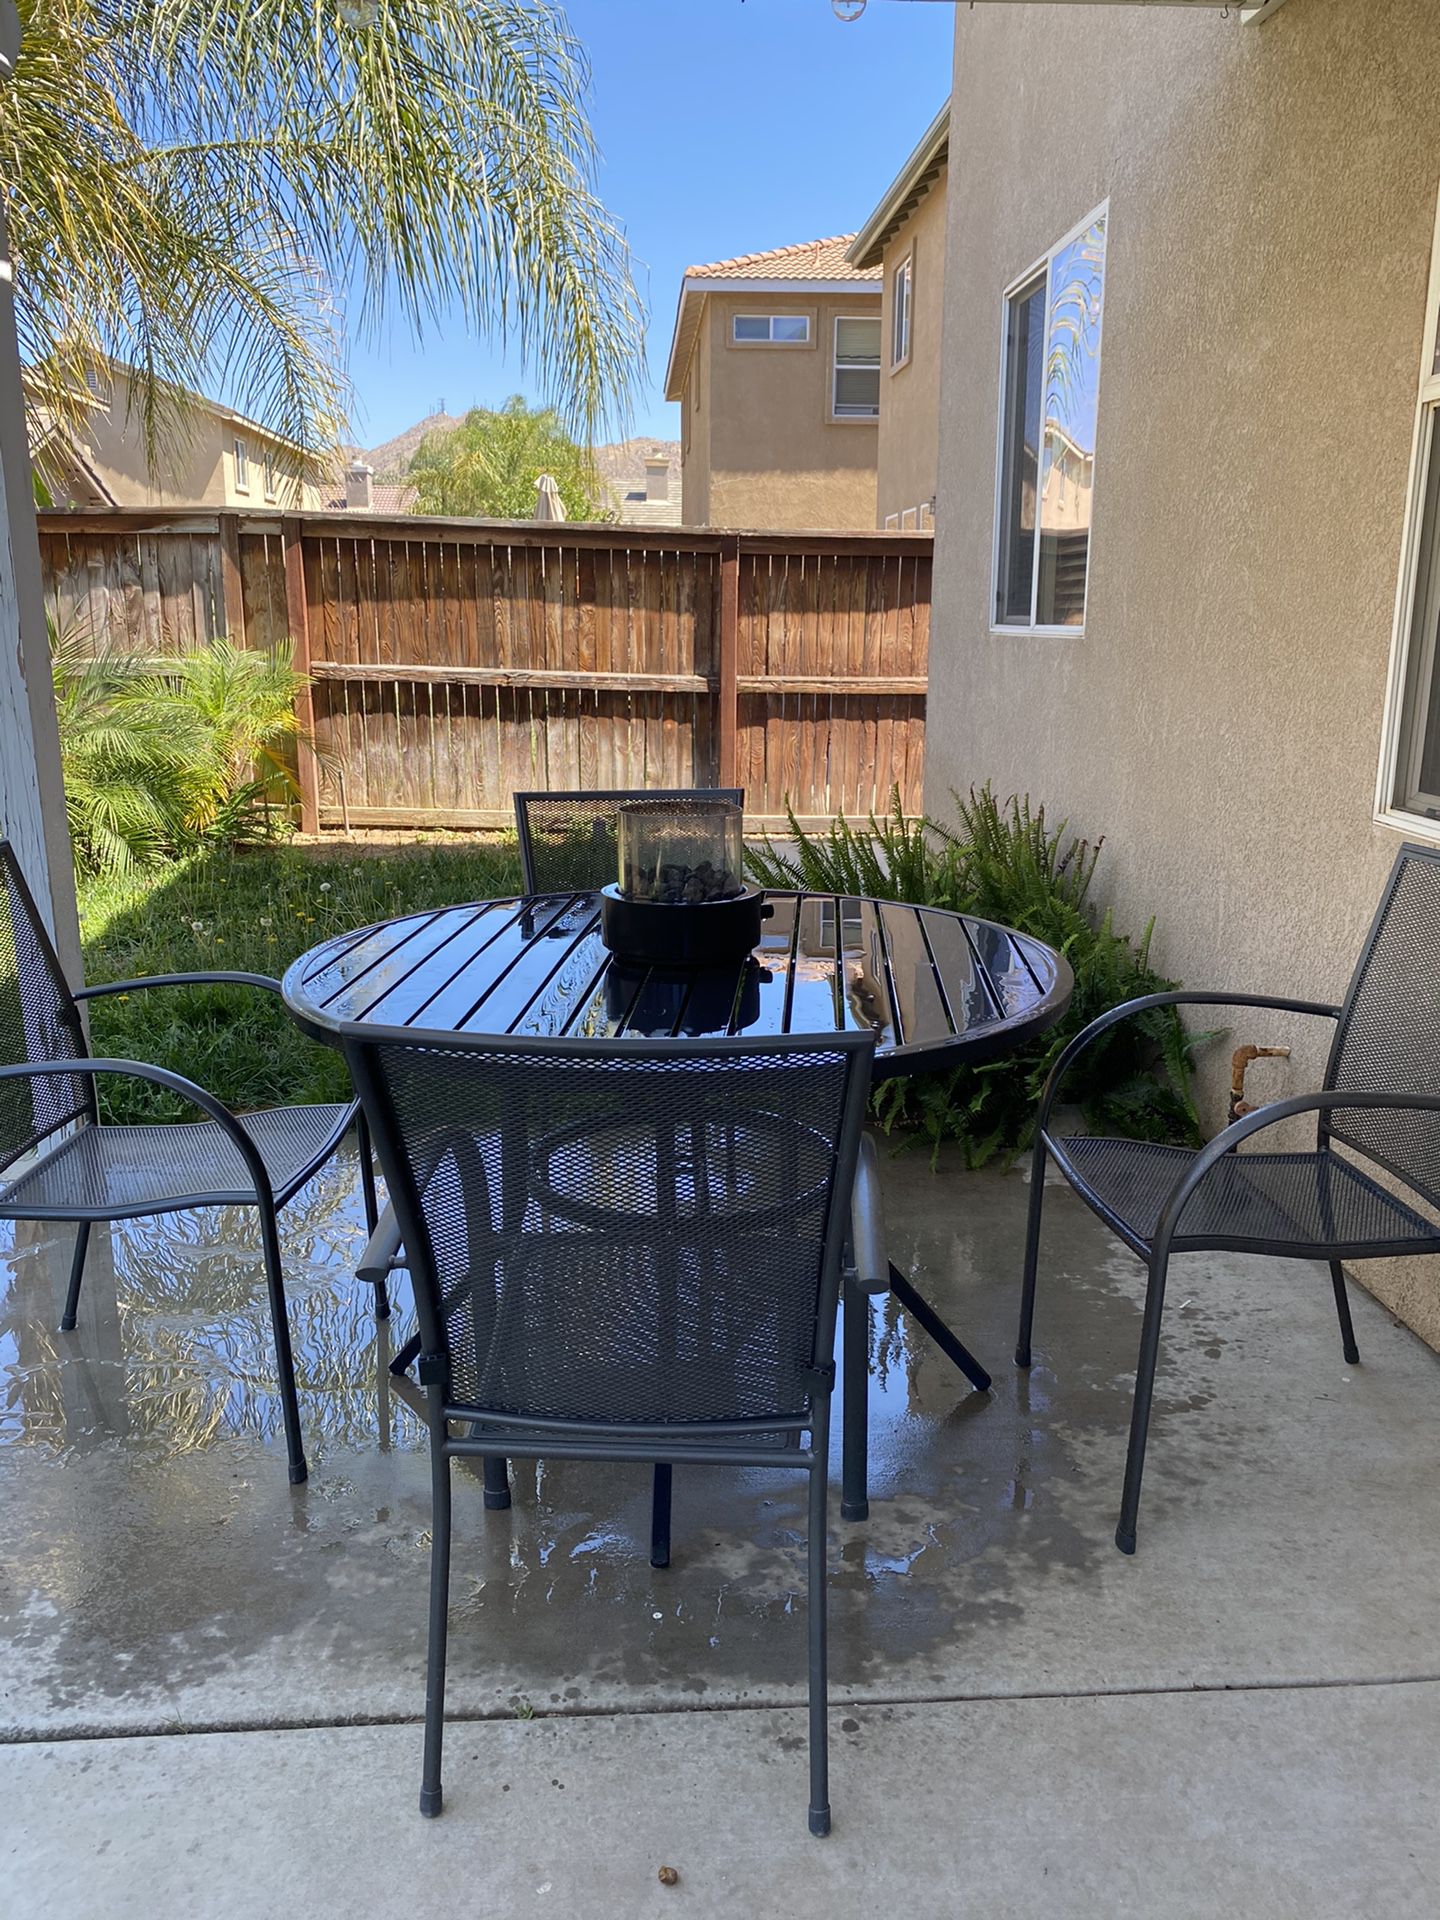 Patio table and chairs with mini fire pit